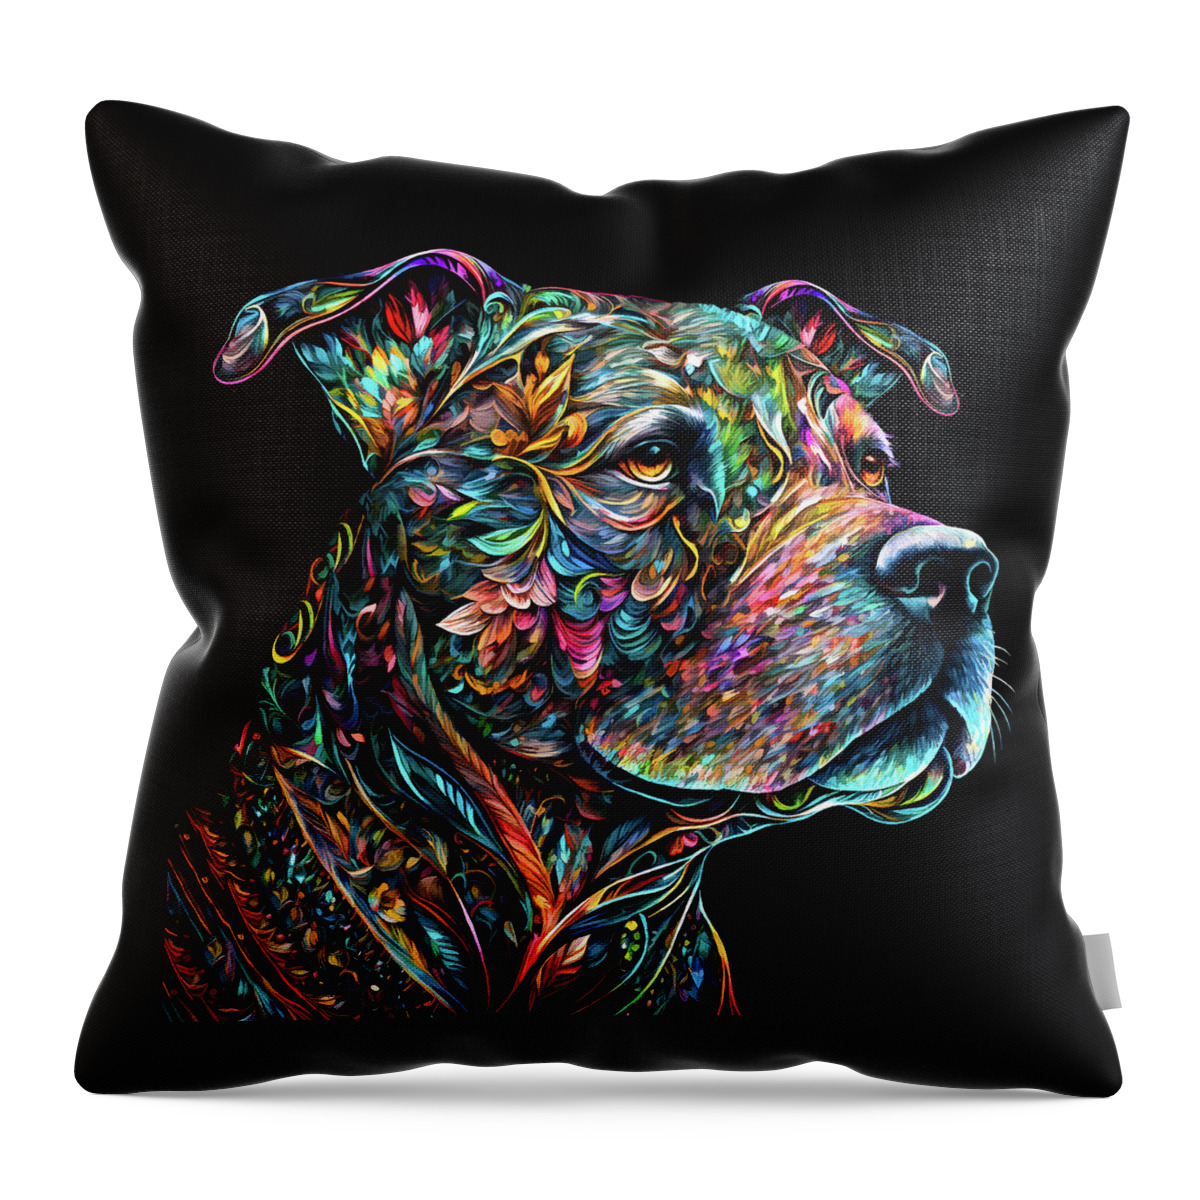 Pit Bulls Throw Pillow featuring the digital art Colorful Pit Bull Art by Peggy Collins